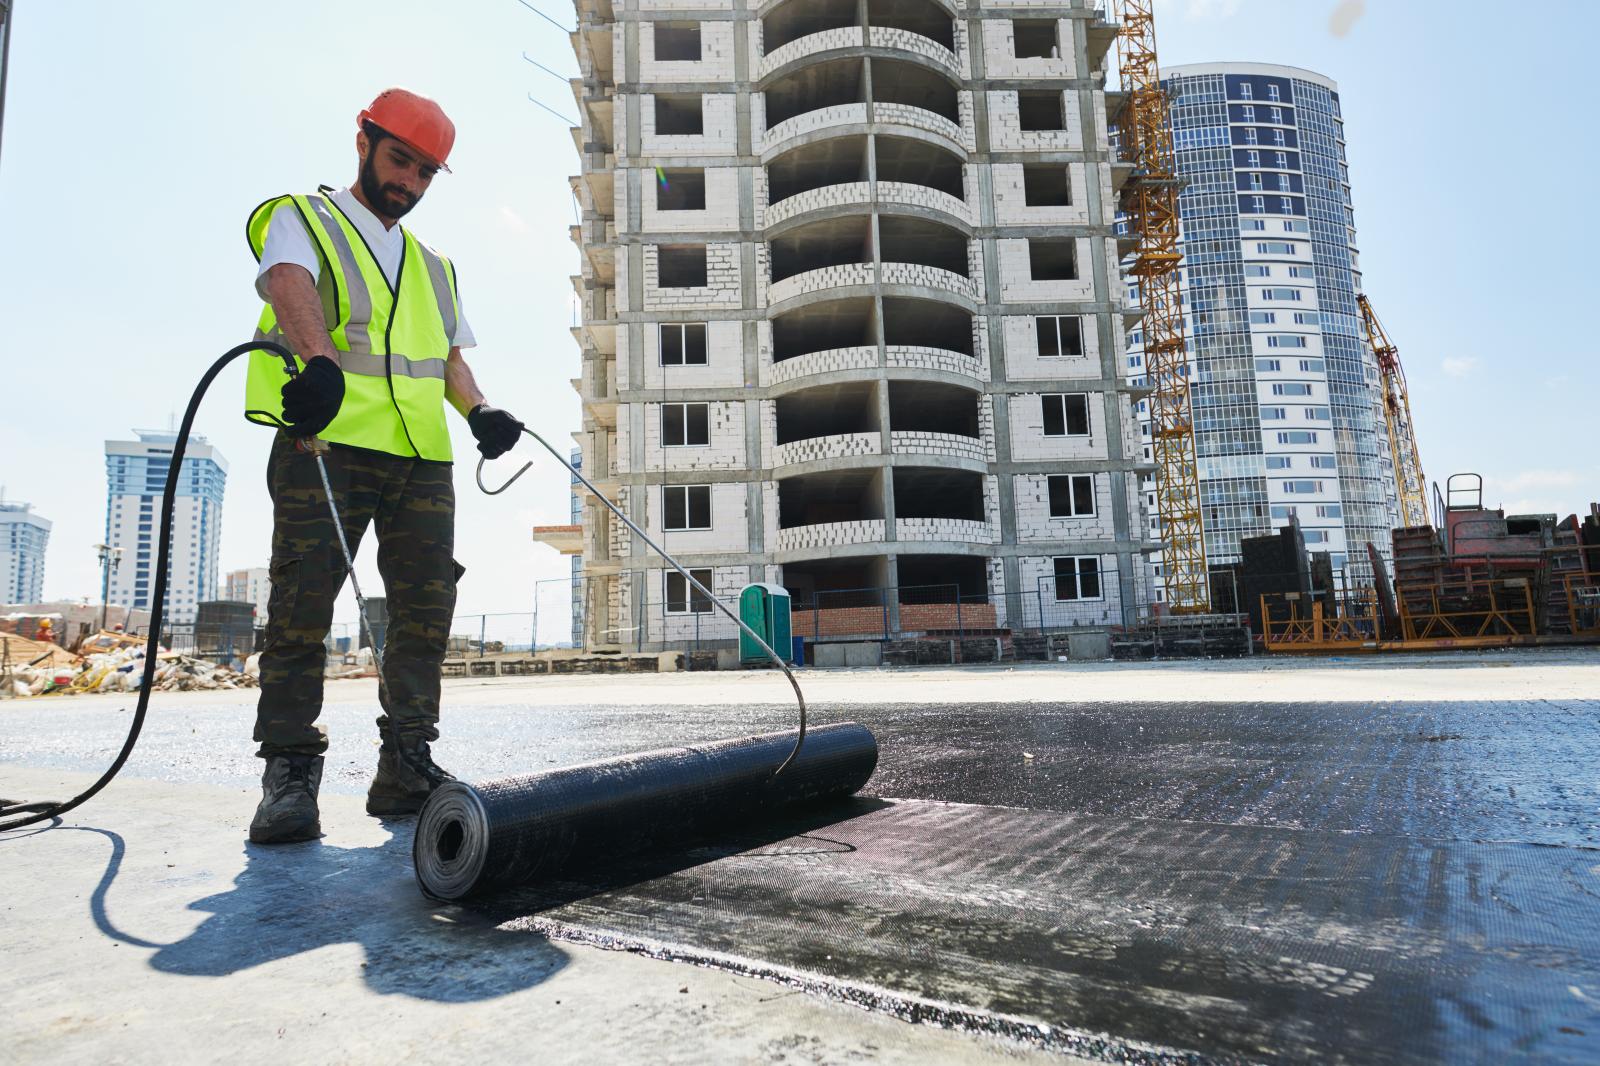 Epdm Roof System - What Is The Life Expectancy Of A Flat Roof?